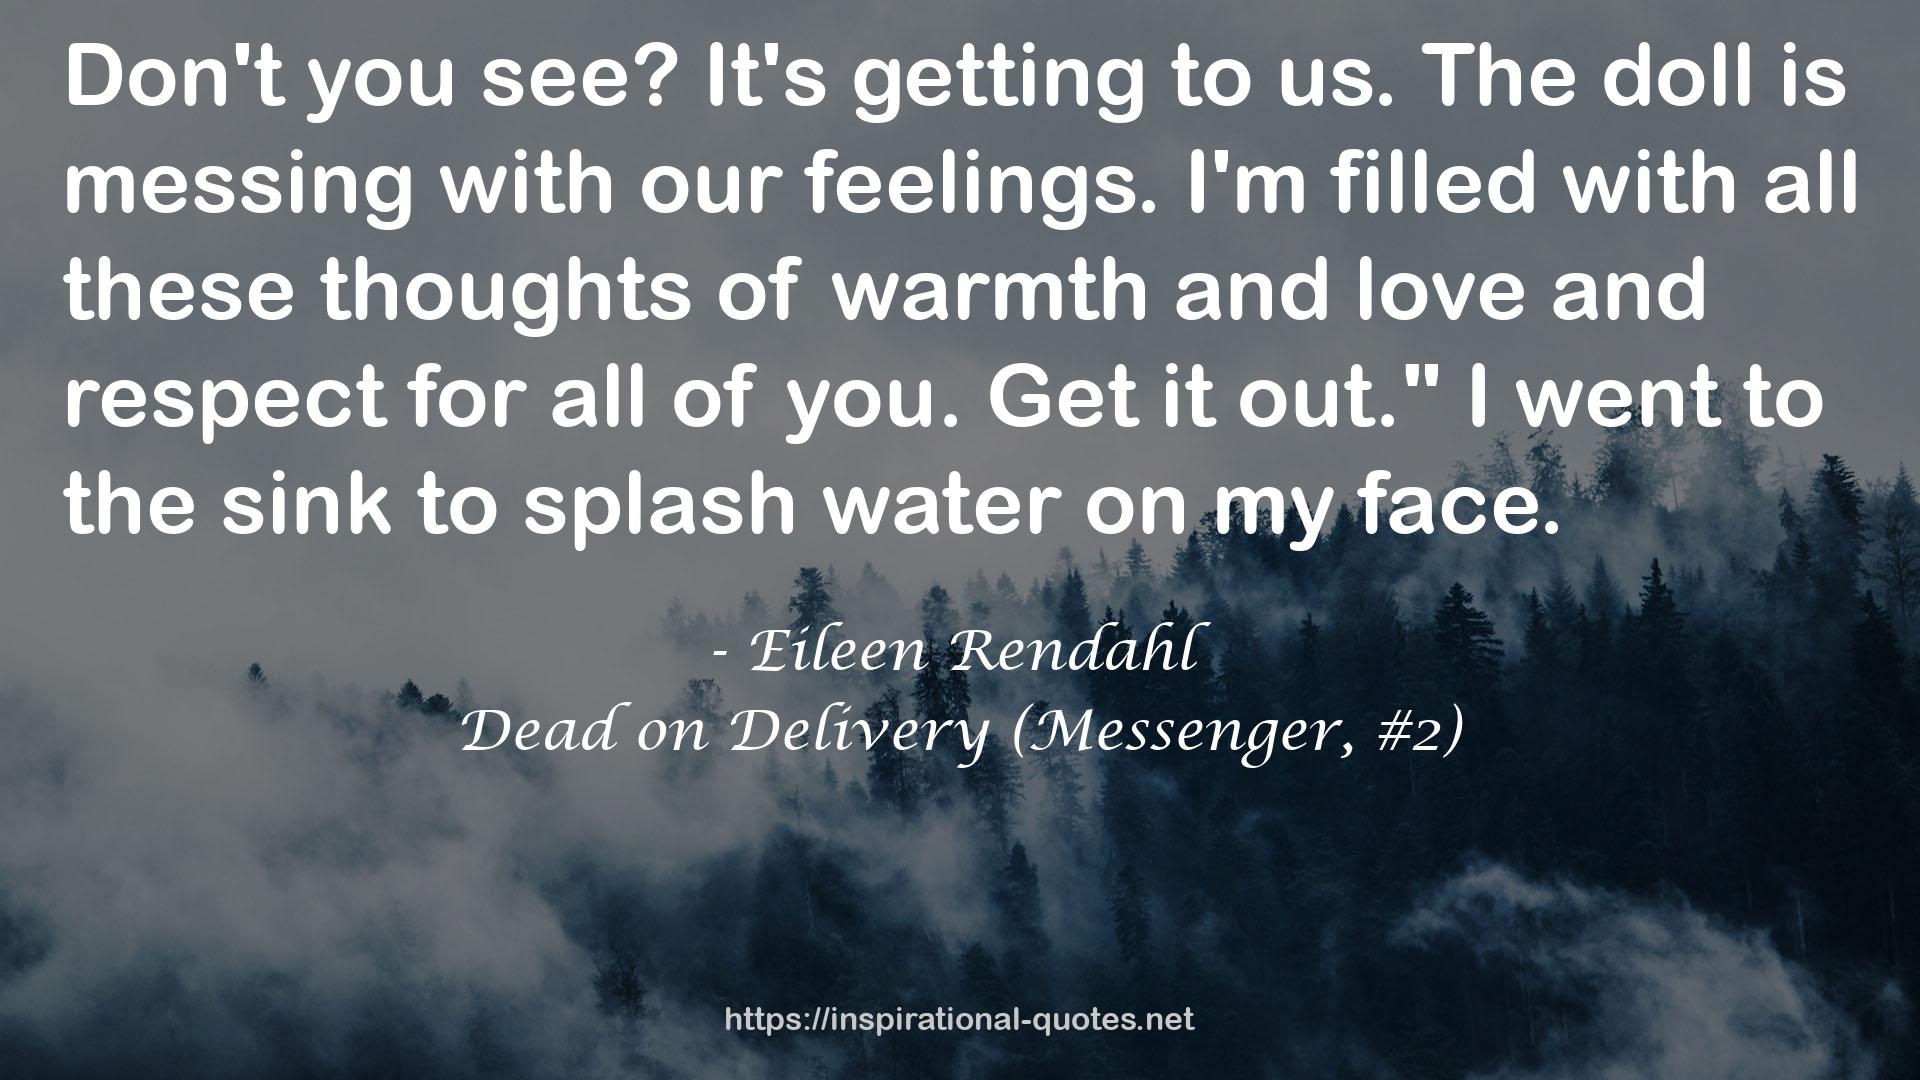 Dead on Delivery (Messenger, #2) QUOTES